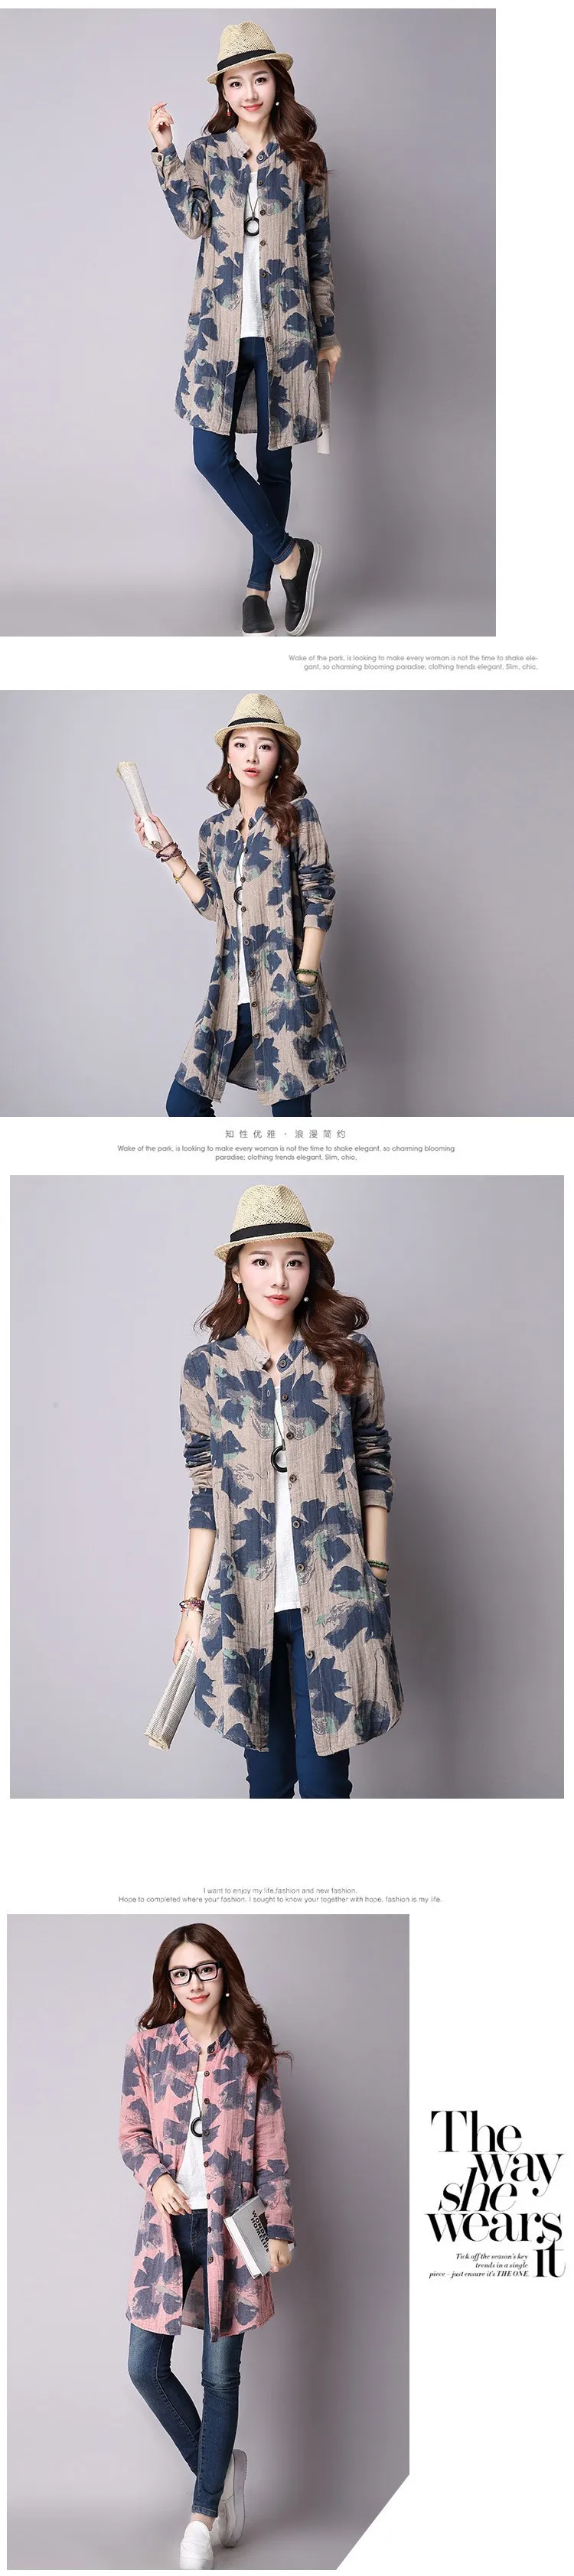 NIJIUDING Spring New Fashion Floral Print Cotton Linen Blouses Casual Long Sleeve Shirt Women  Top With Pockets cute blouses